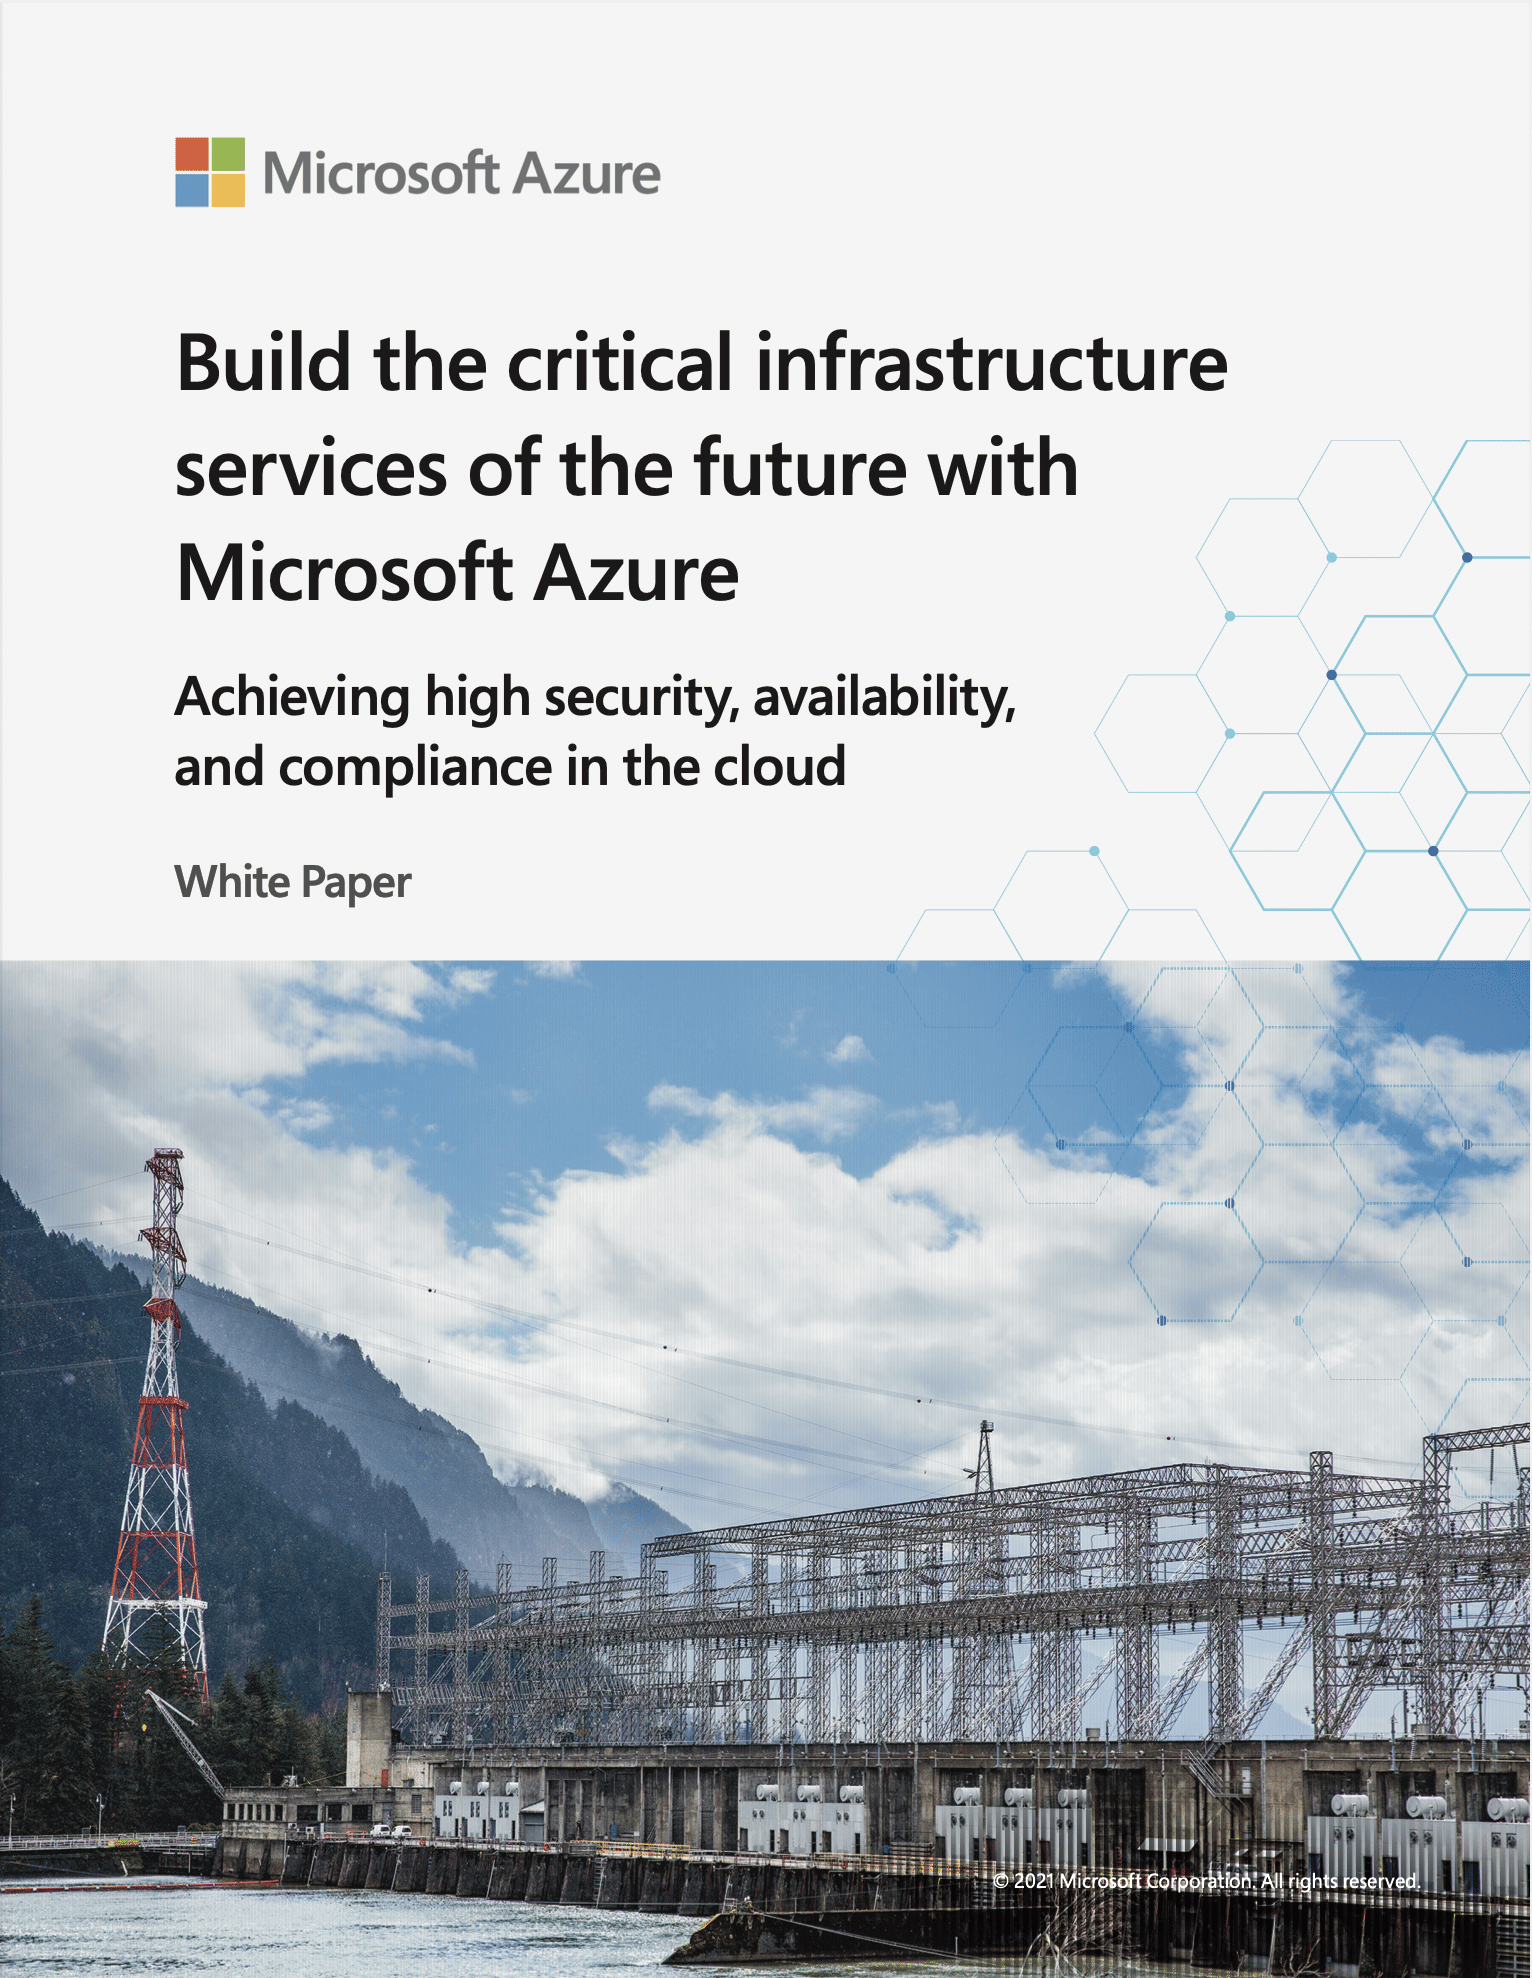 Build the critical infrastructure services of the future with Microsoft Azure 6